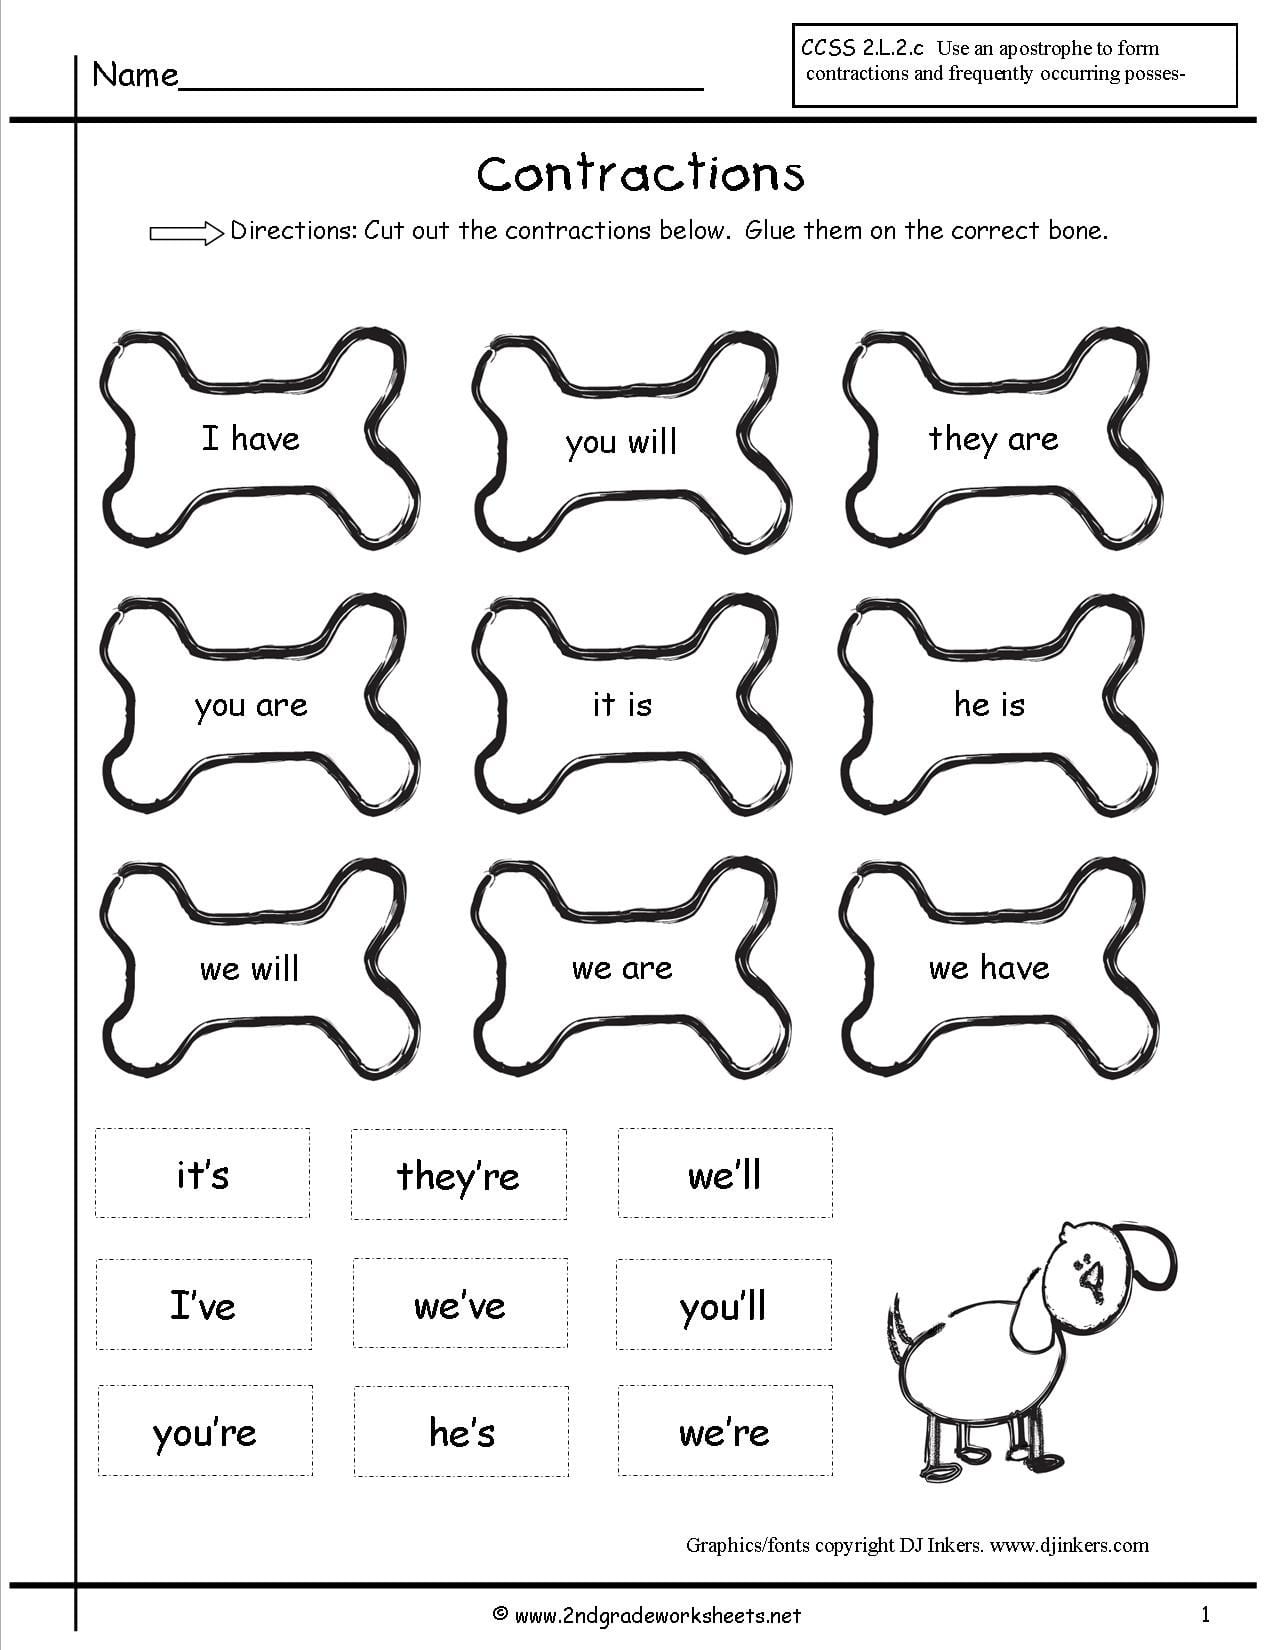 free-contractions-worksheets-and-printouts-db-excel